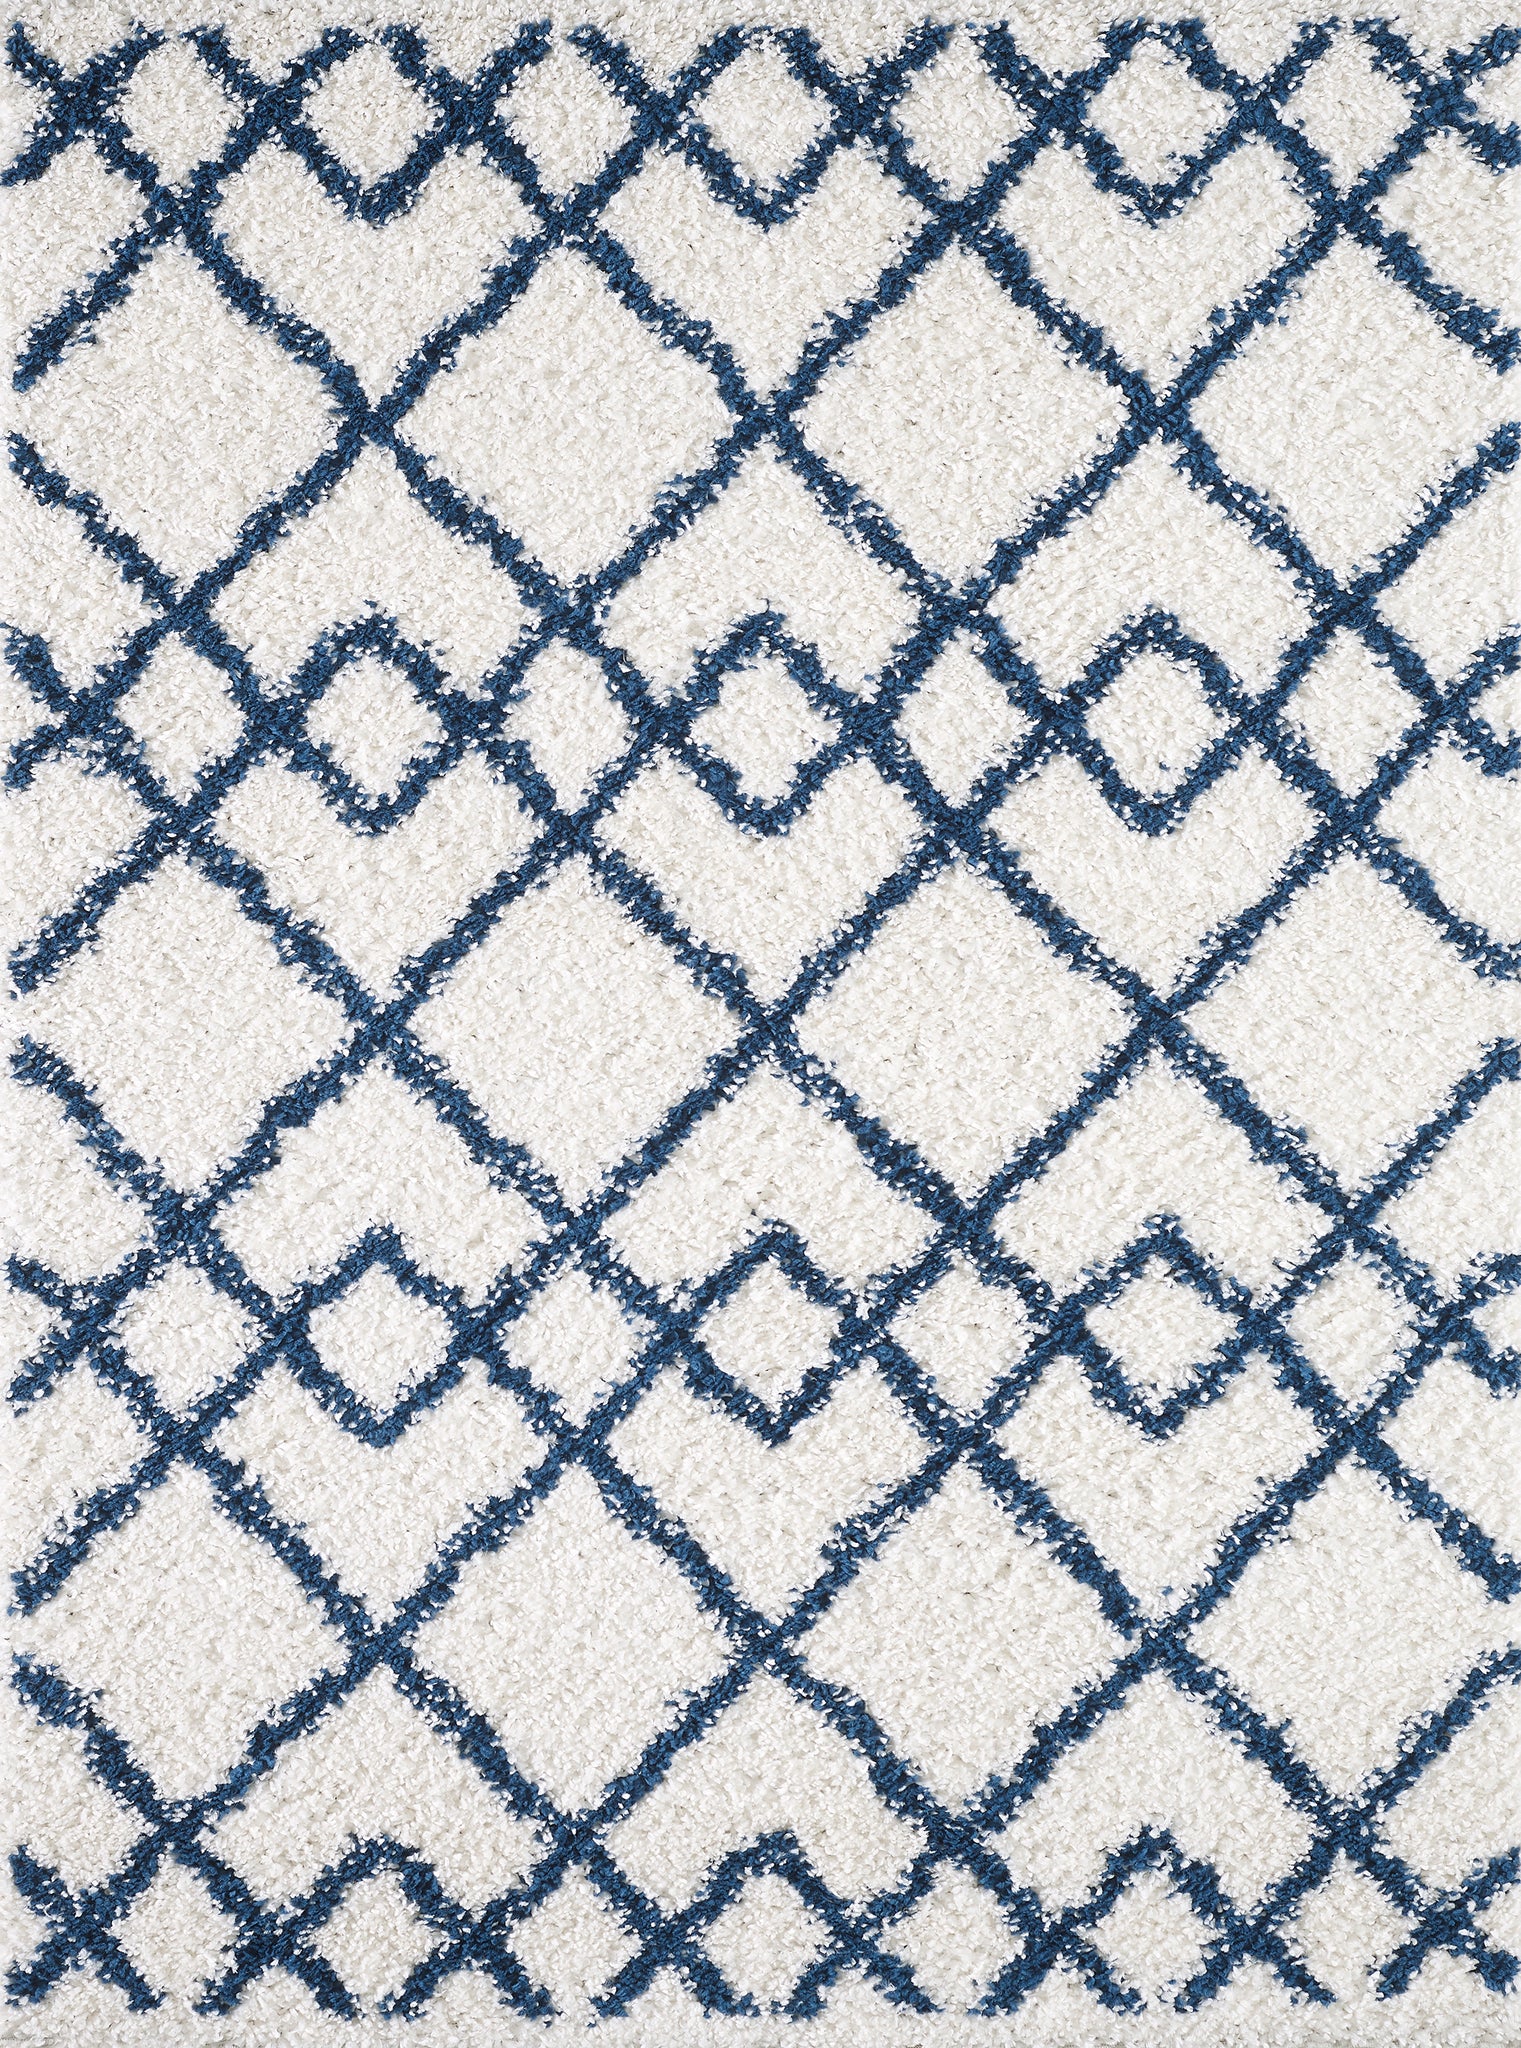 KAS Pax 1208 Ivory Blue Trends Area Rug